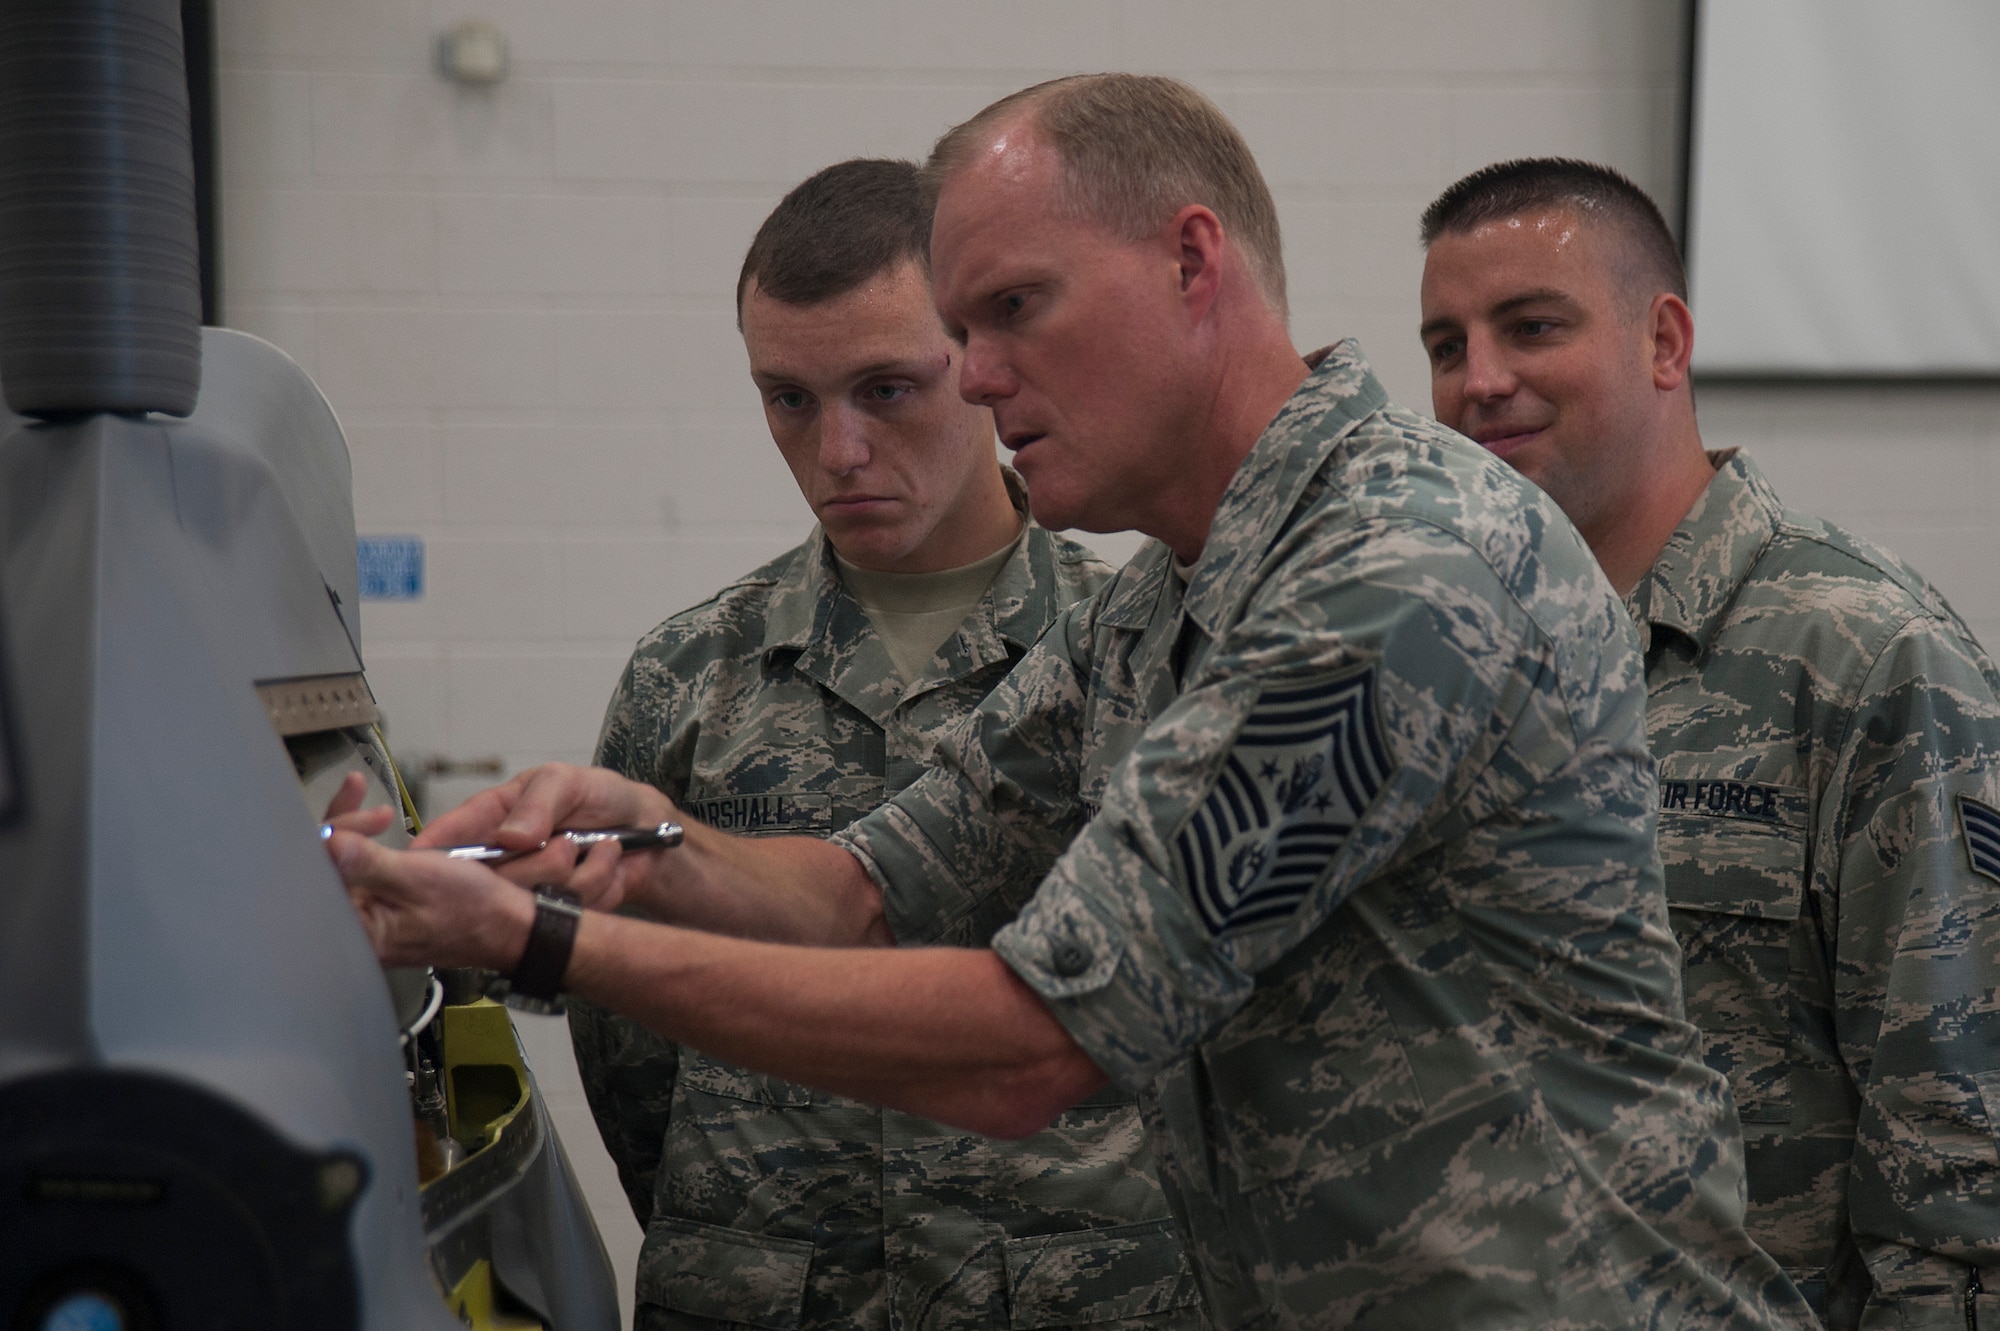 Chief Master Sgt. of the Air Force, James A. Cody, performs simulated missile maintenance under the supervision of 532nd Training Squadron instructors, July 8, 2014, Vandenberg Air Force Base, Calif. (U.S. Air Force photo by Michael Peterson/Released)